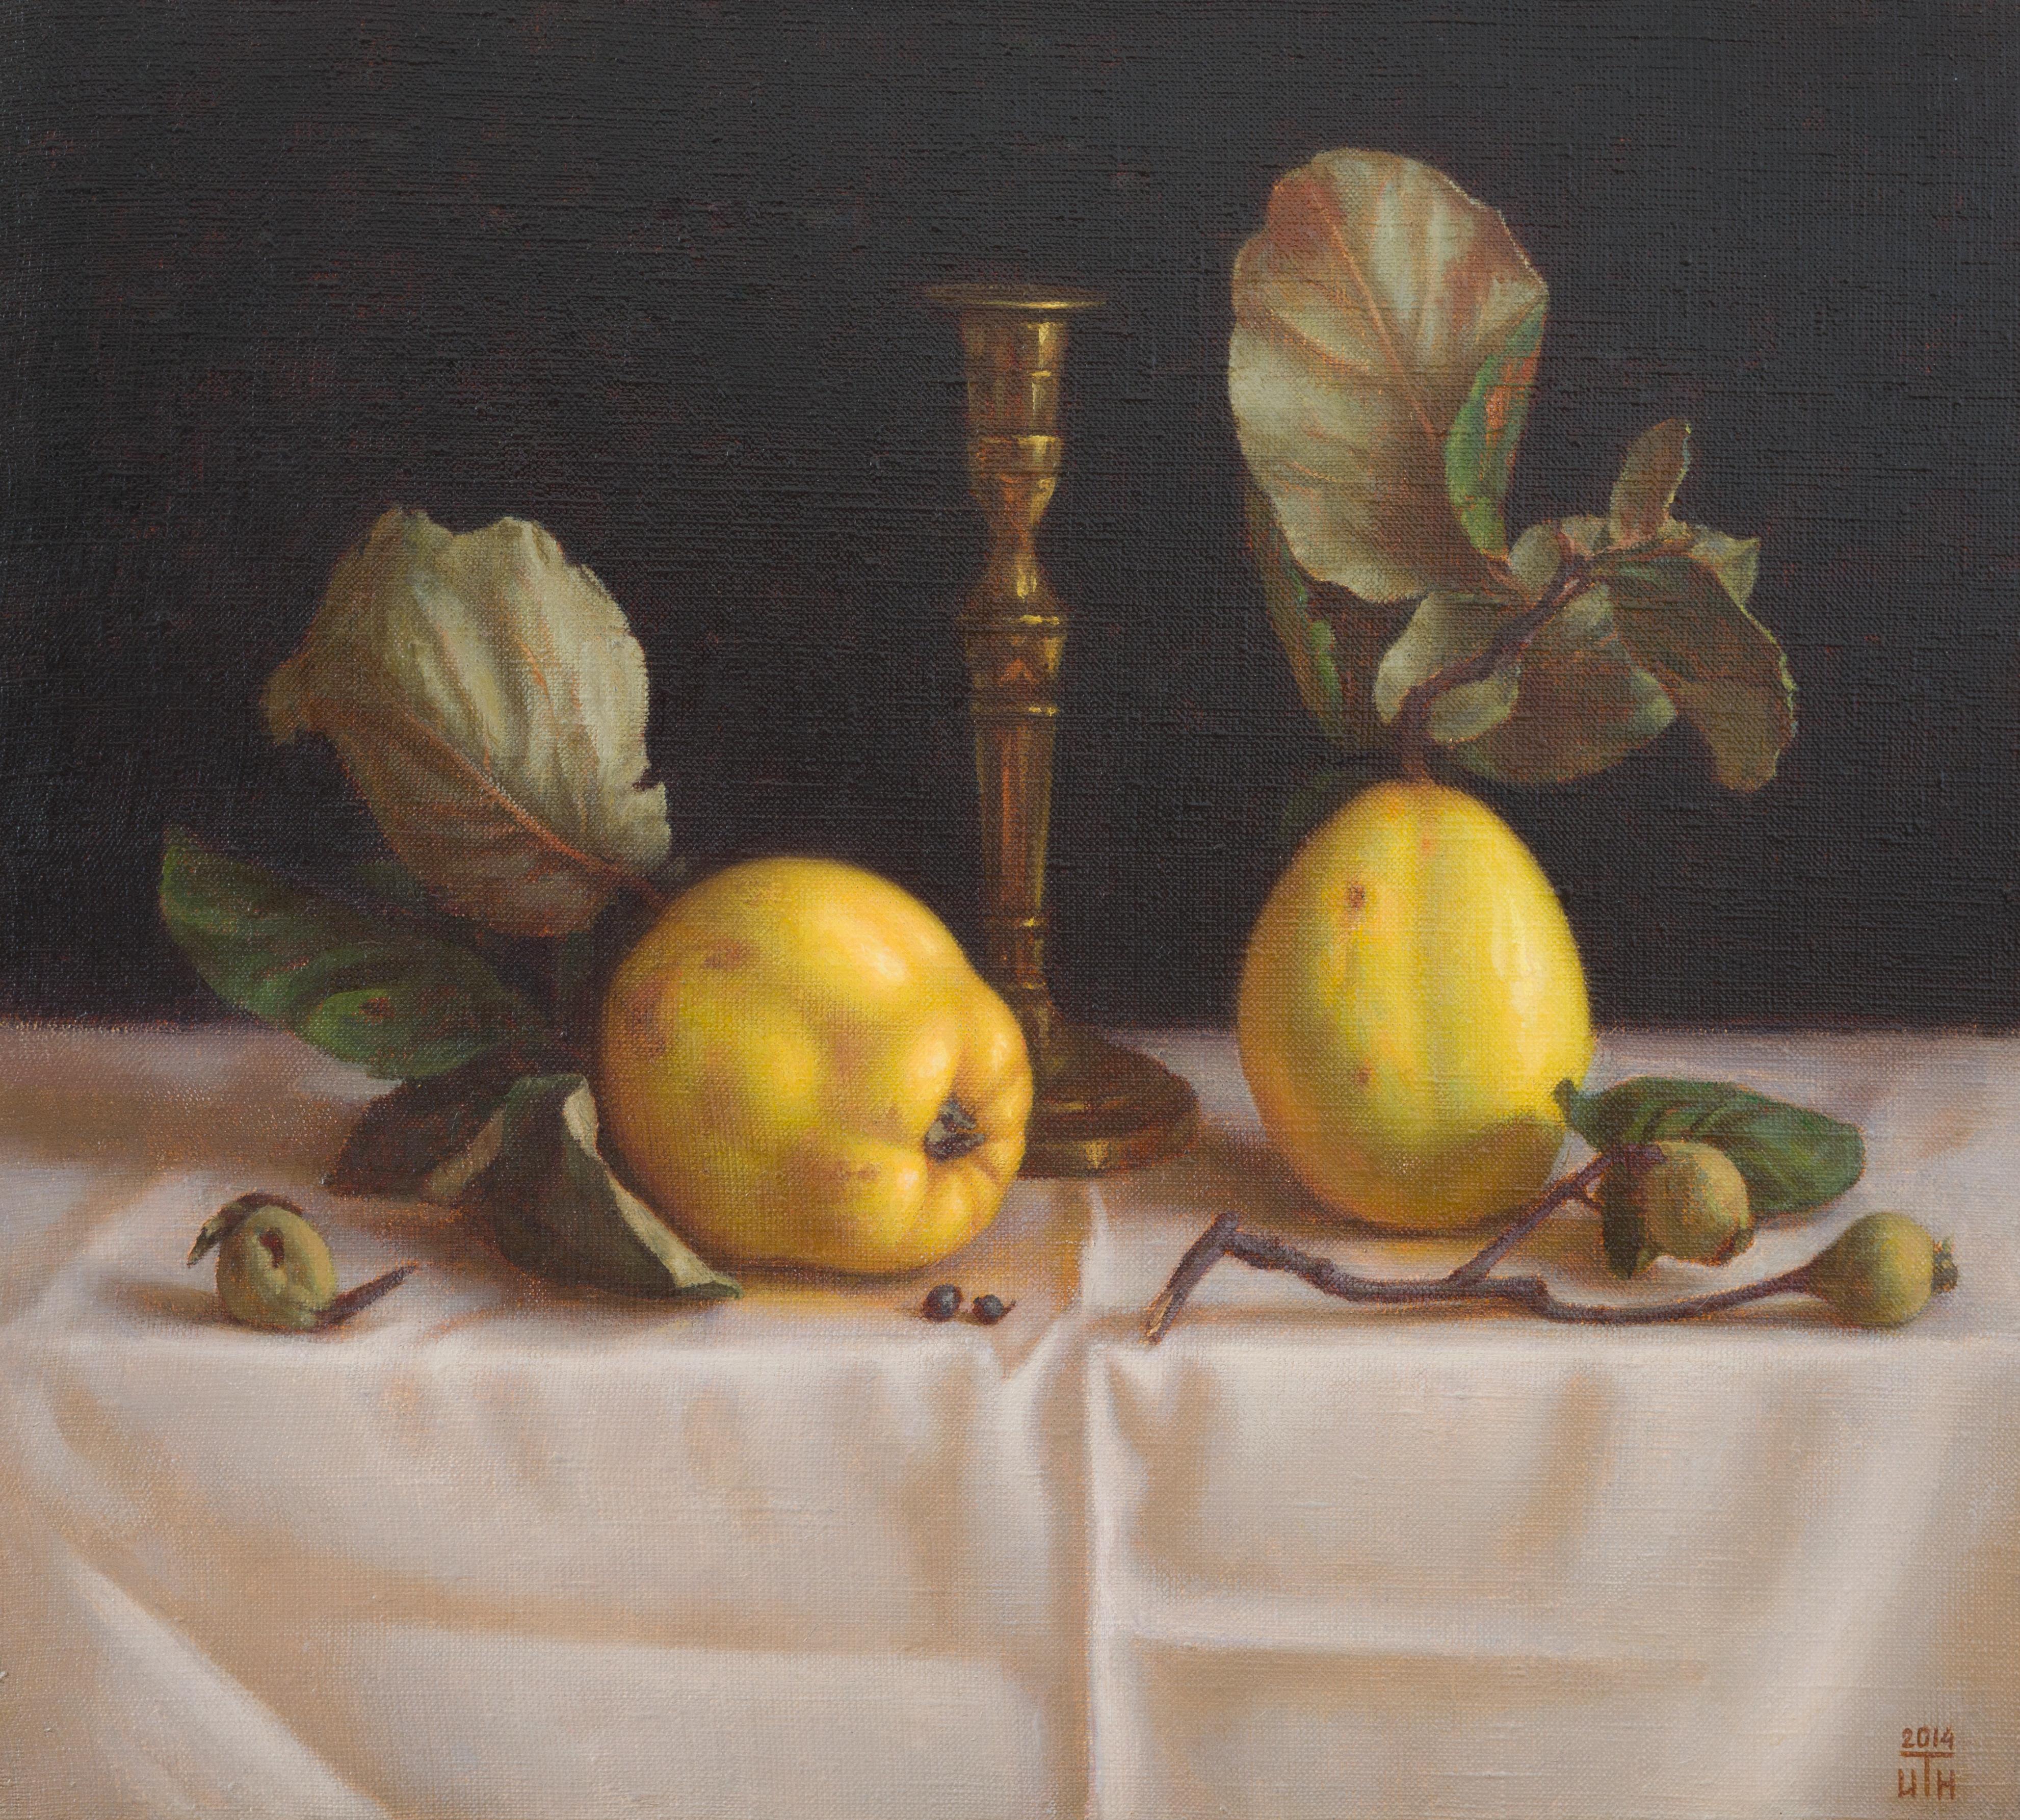 The beautiful gold color of fruits and their texture inspired me to create this work. The painting style is inspired by the masters of the 17th century of Holland. The color scheme is a harmonious marriage of rich greens, yellows, and blacks. The